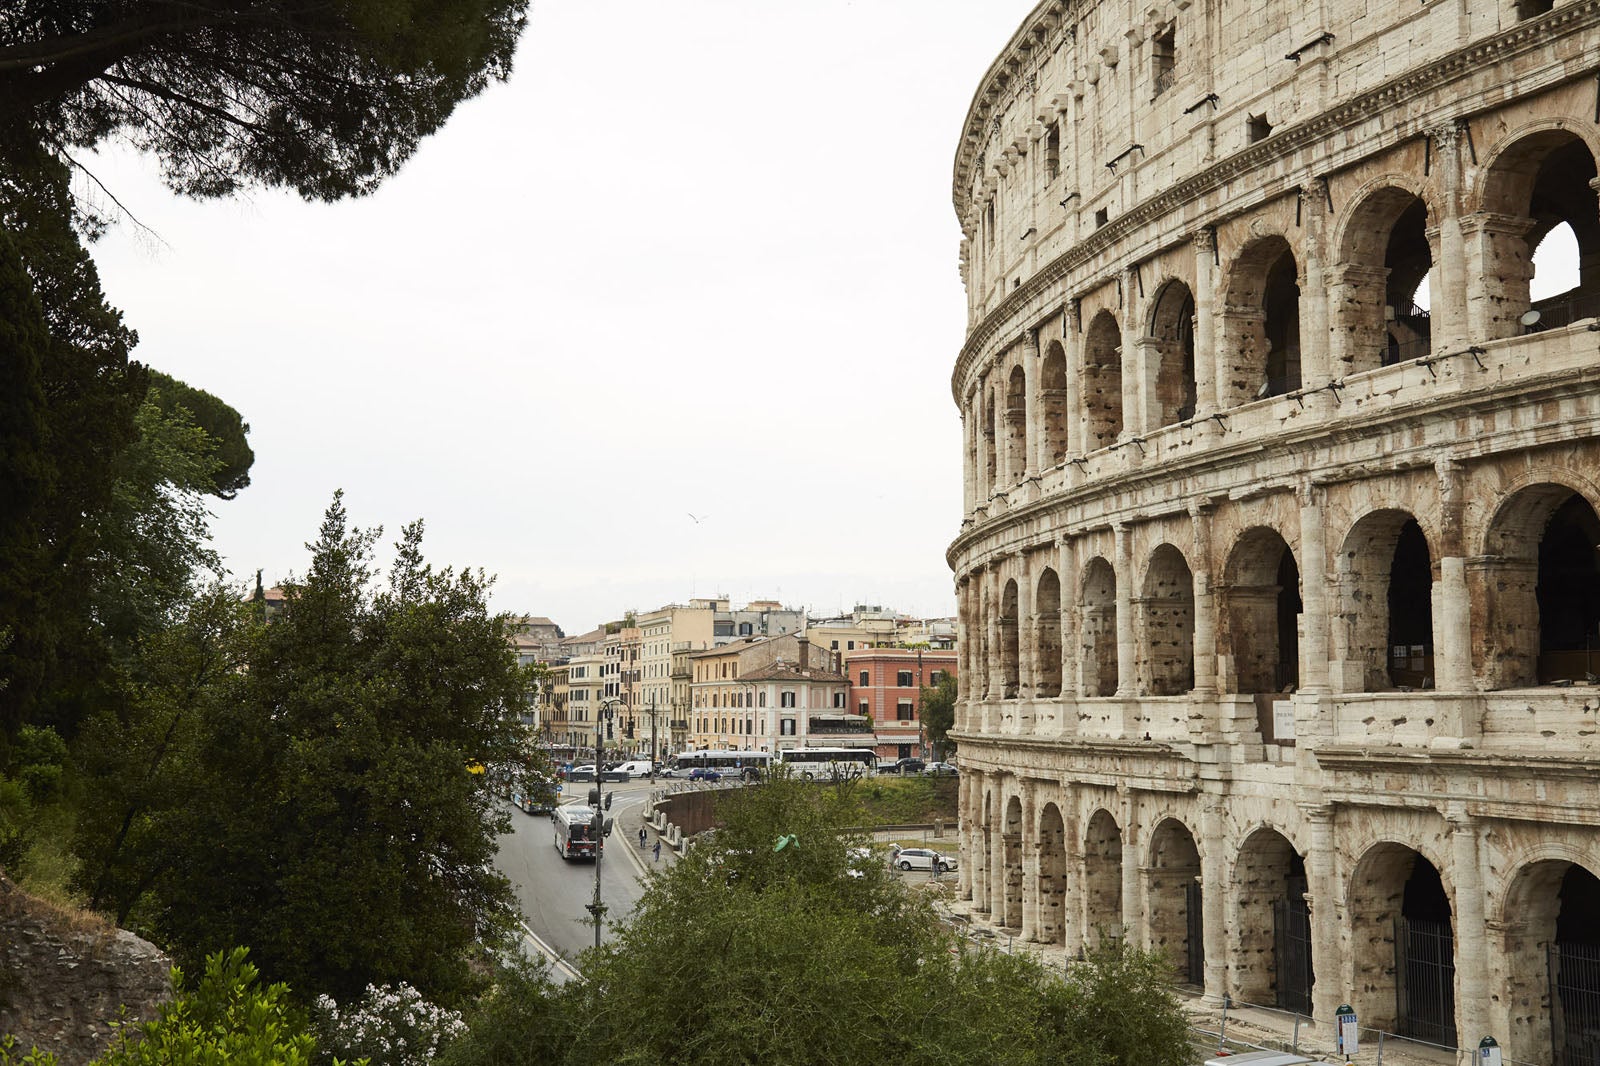 Image of the Colosseum in Rome, Italy.